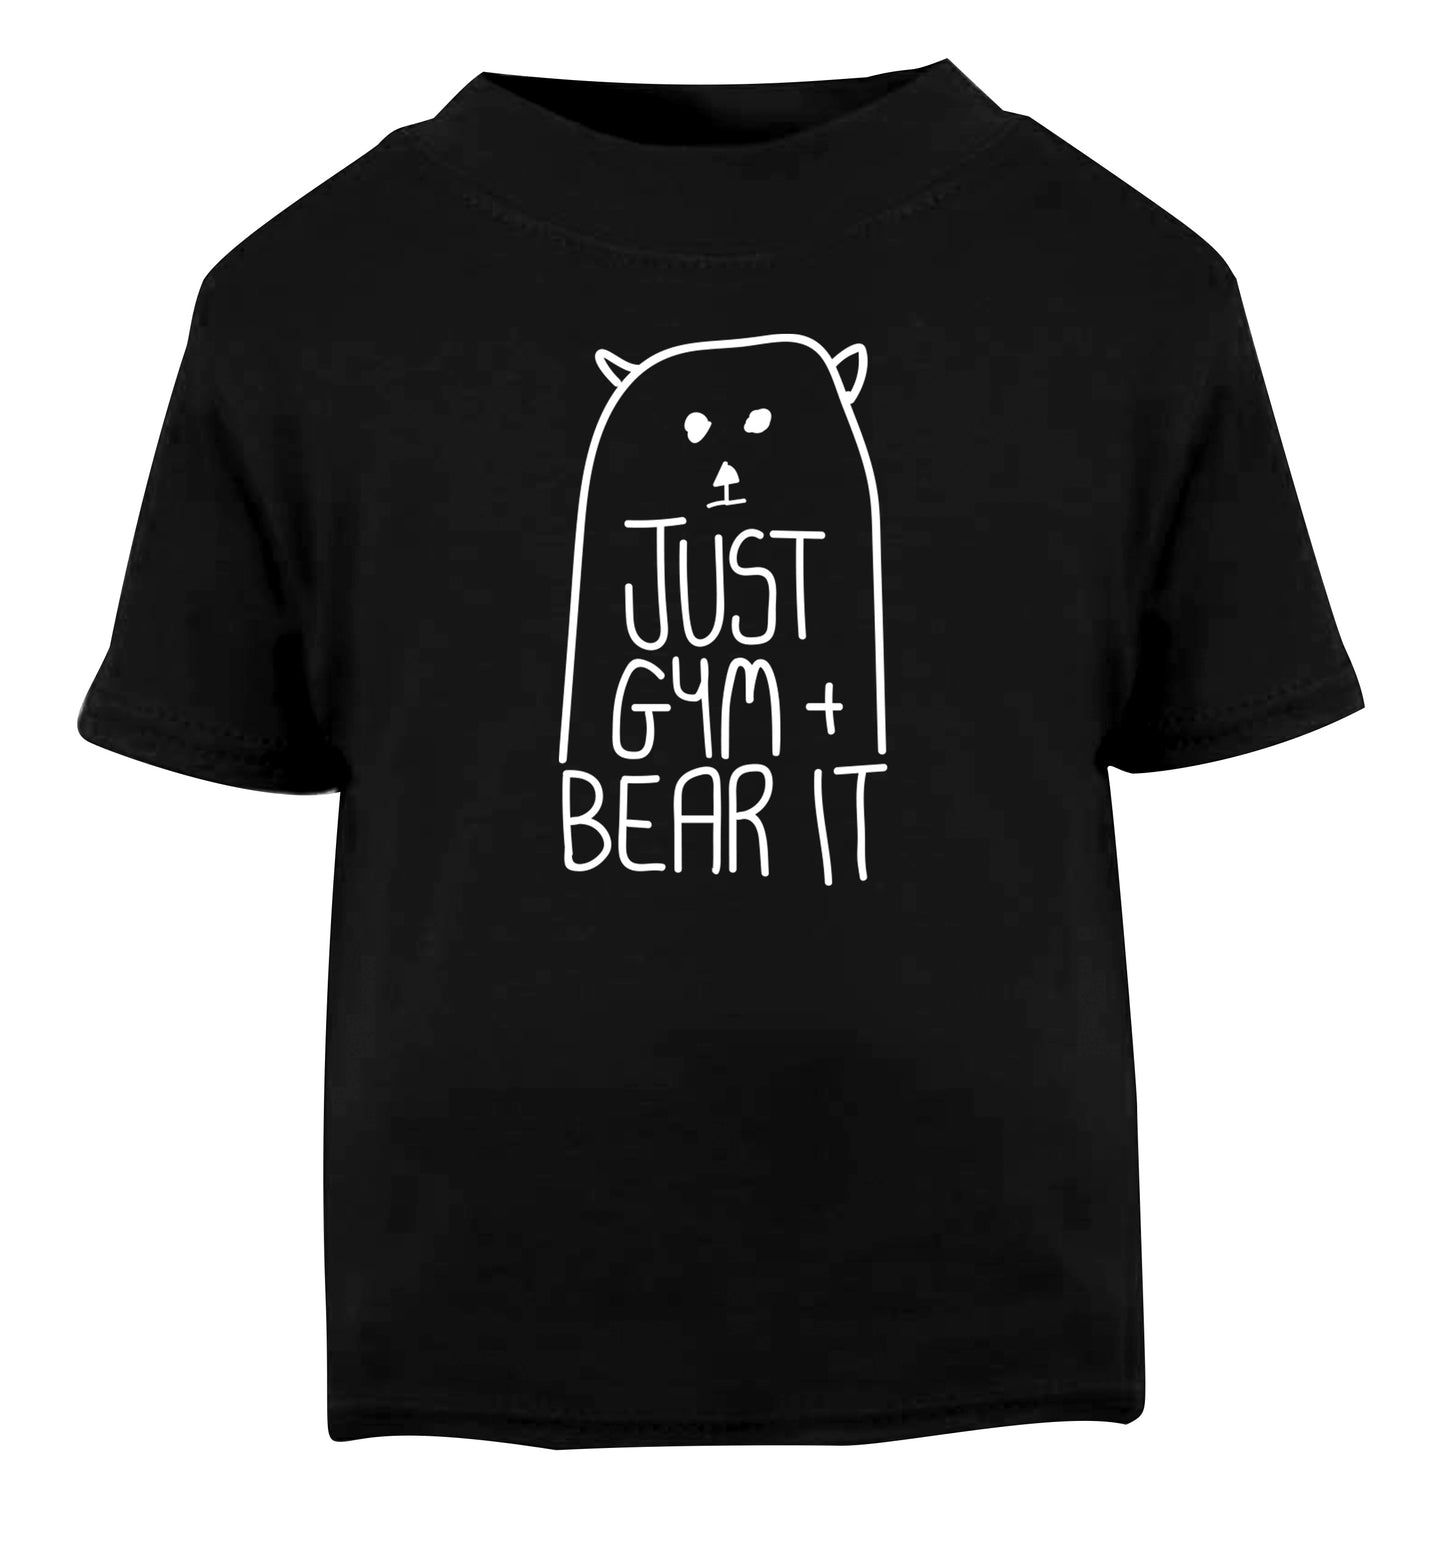 Just gym and bear it Black Baby Toddler Tshirt 2 years